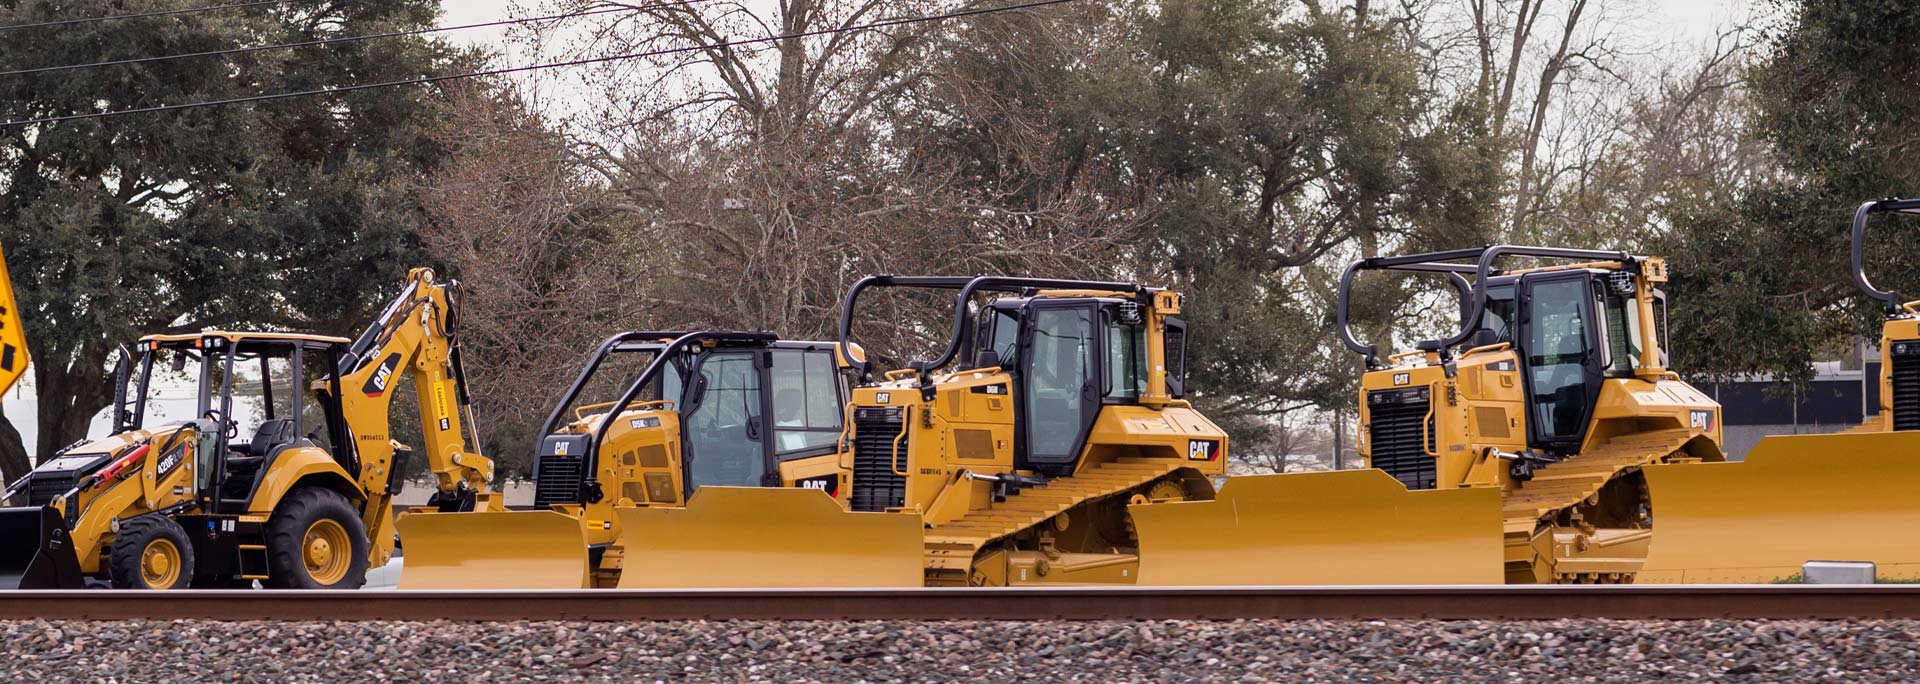 Heavy Earth Moving Equipment Rentals In Fresno CA